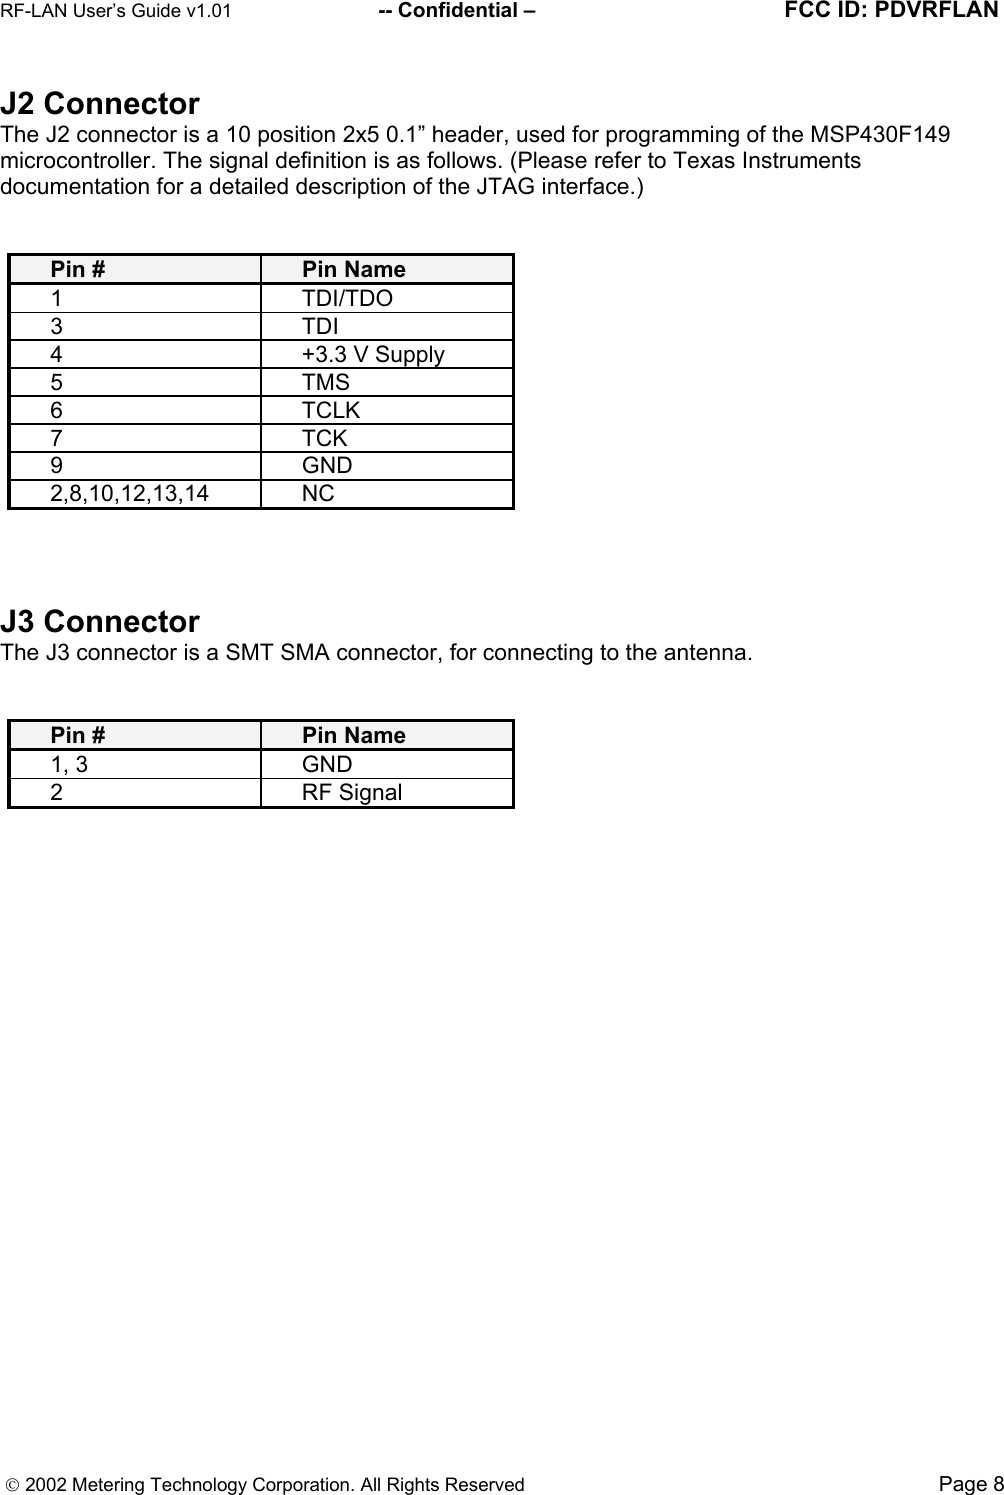 RF-LAN User’s Guide v1.01                        -- Confidential –                                       FCC ID: PDVRFLAN      2002 Metering Technology Corporation. All Rights Reserved                                                                               Page 8 J2 Connector The J2 connector is a 10 position 2x5 0.1” header, used for programming of the MSP430F149 microcontroller. The signal definition is as follows. (Please refer to Texas Instruments documentation for a detailed description of the JTAG interface.)   Pin #  Pin Name 1 TDI/TDO 3 TDI 4  +3.3 V Supply 5 TMS 6 TCLK 7 TCK 9 GND 2,8,10,12,13,14 NC    J3 Connector The J3 connector is a SMT SMA connector, for connecting to the antenna.   Pin #    Pin Name 1, 3  GND 2 RF Signal   